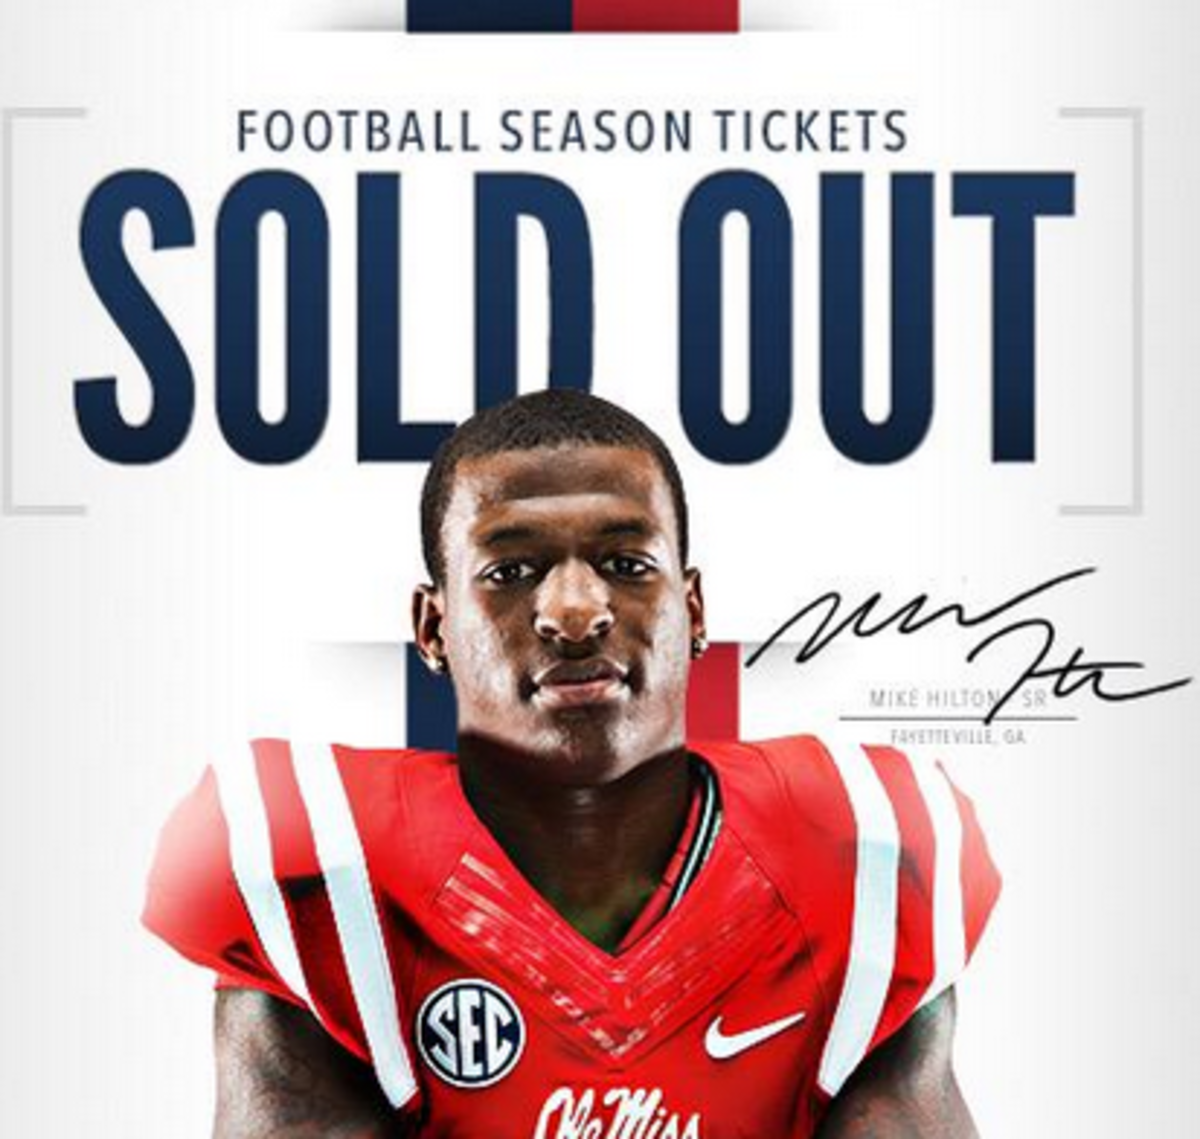 Ole Miss Football Tickets are Sold Out.